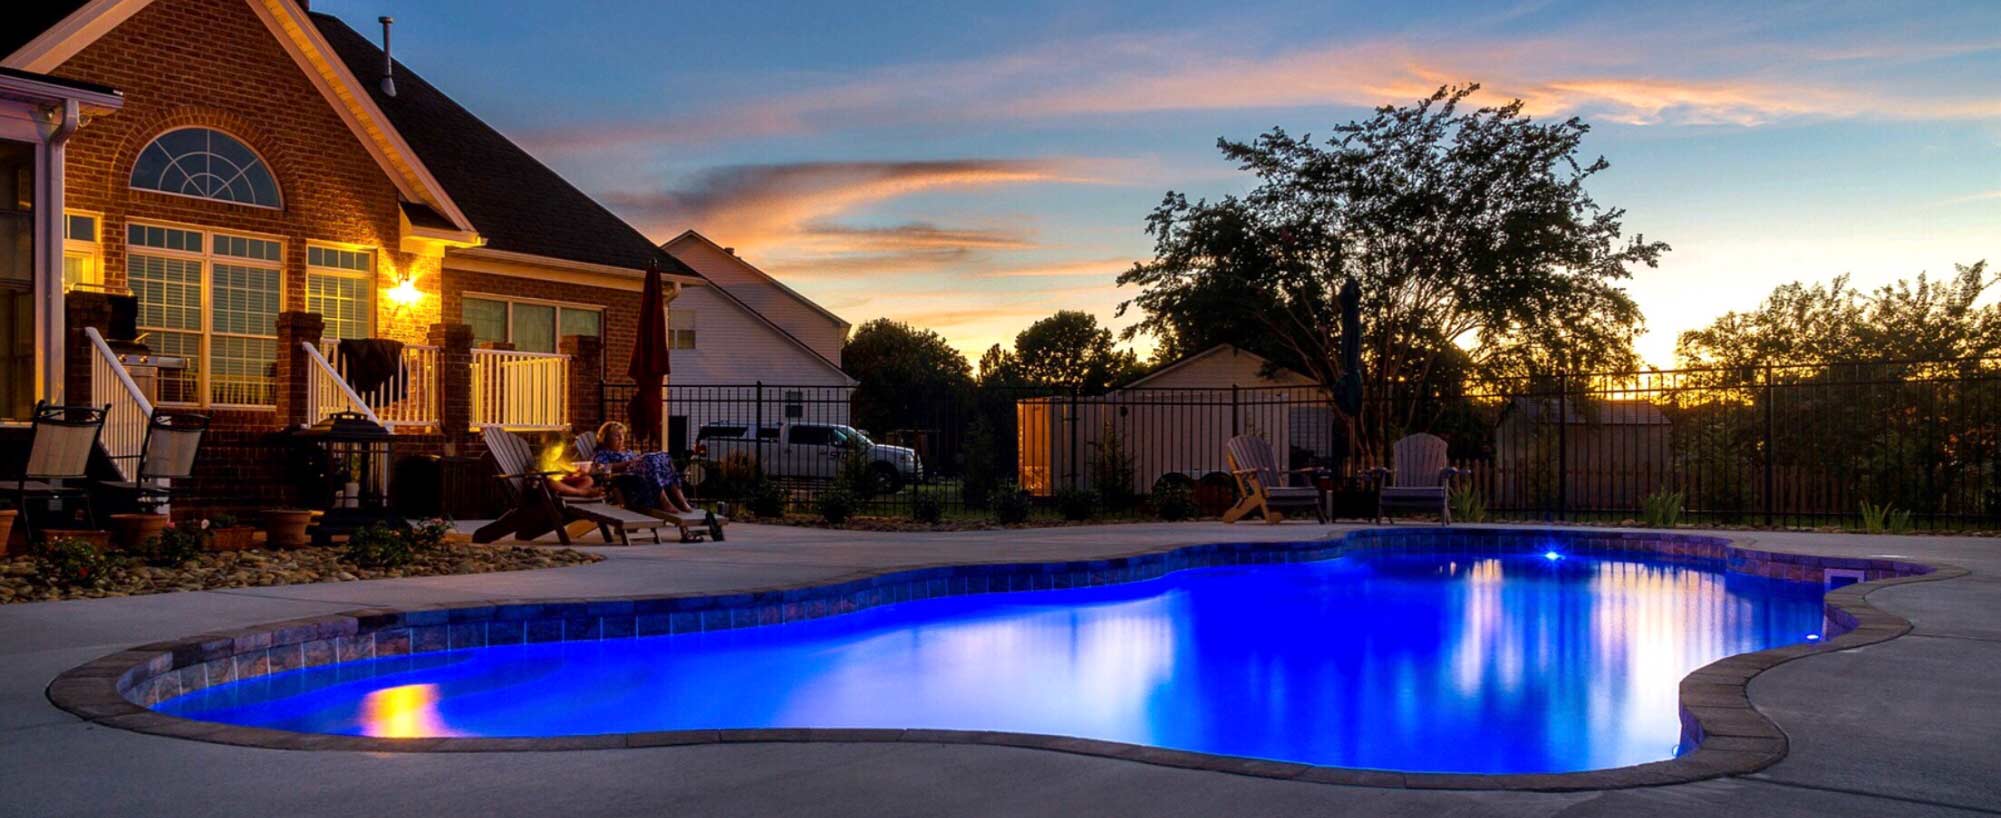 Best Pool Lighting Products and Ideas 1